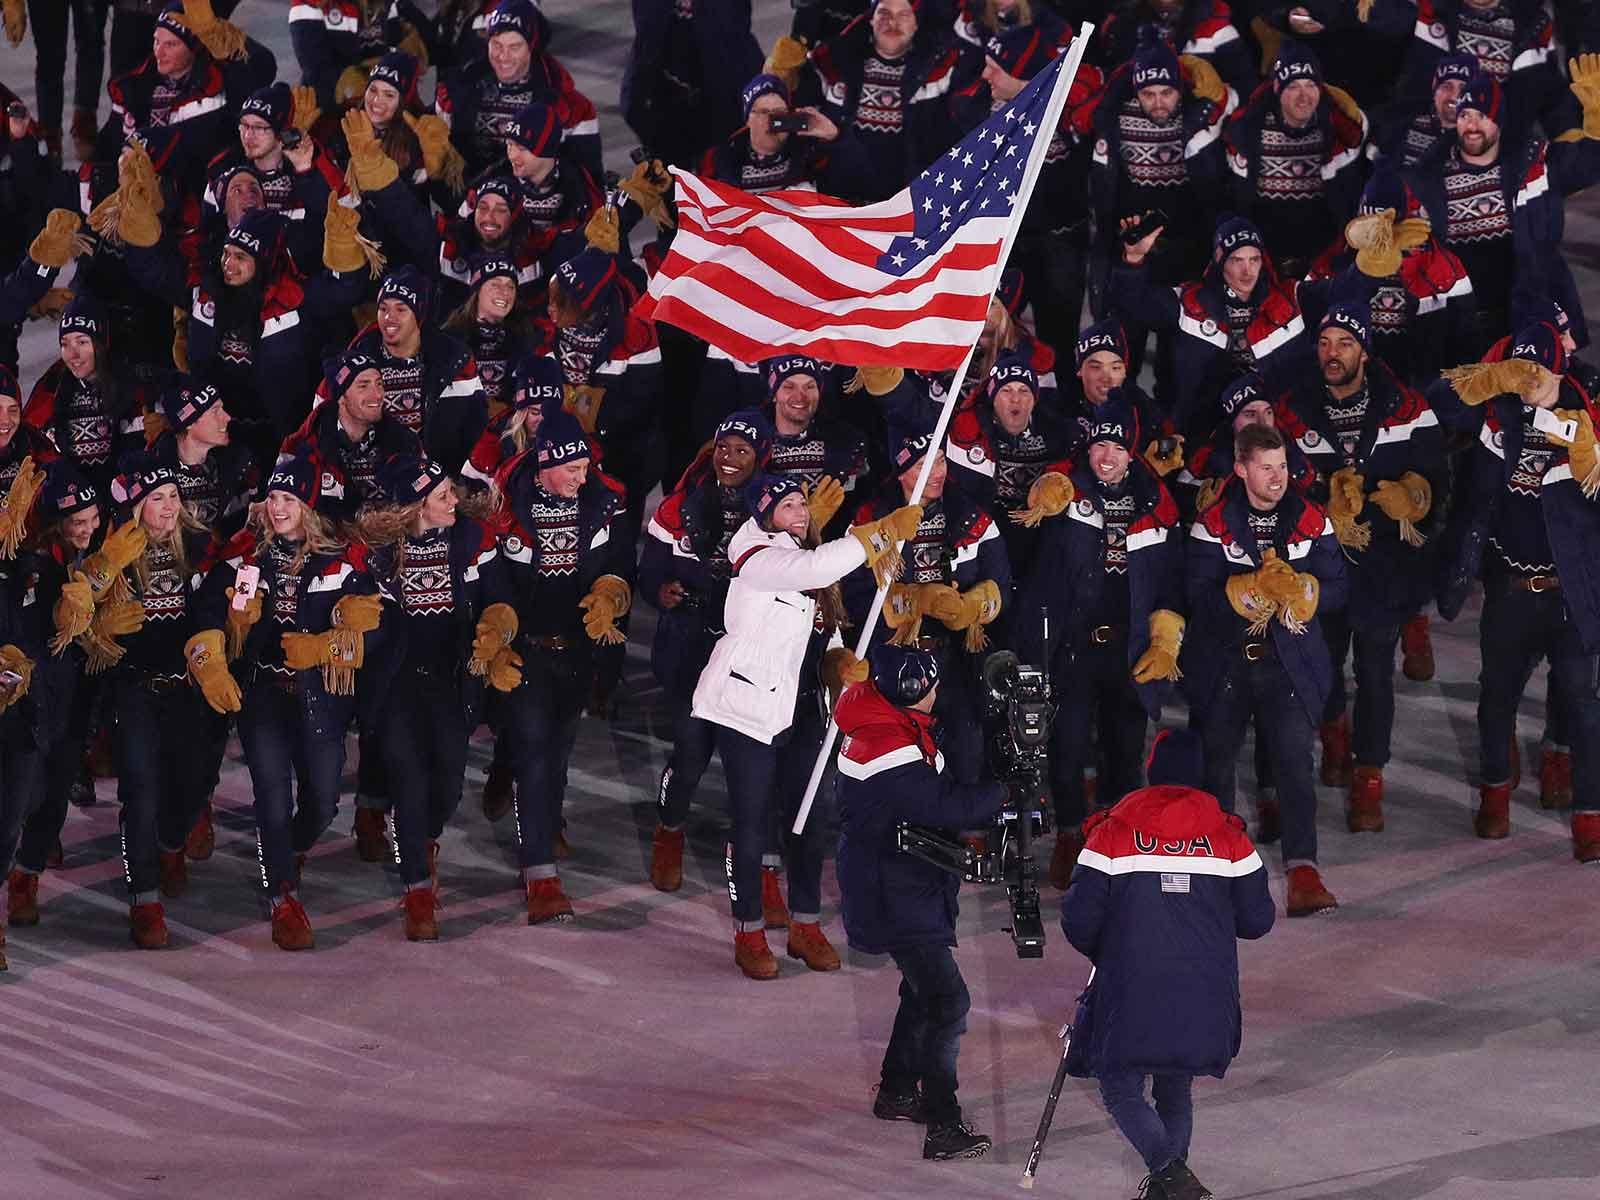 Must-See Moments From the 2018 PyeongChang Olympics Opening Ceremony